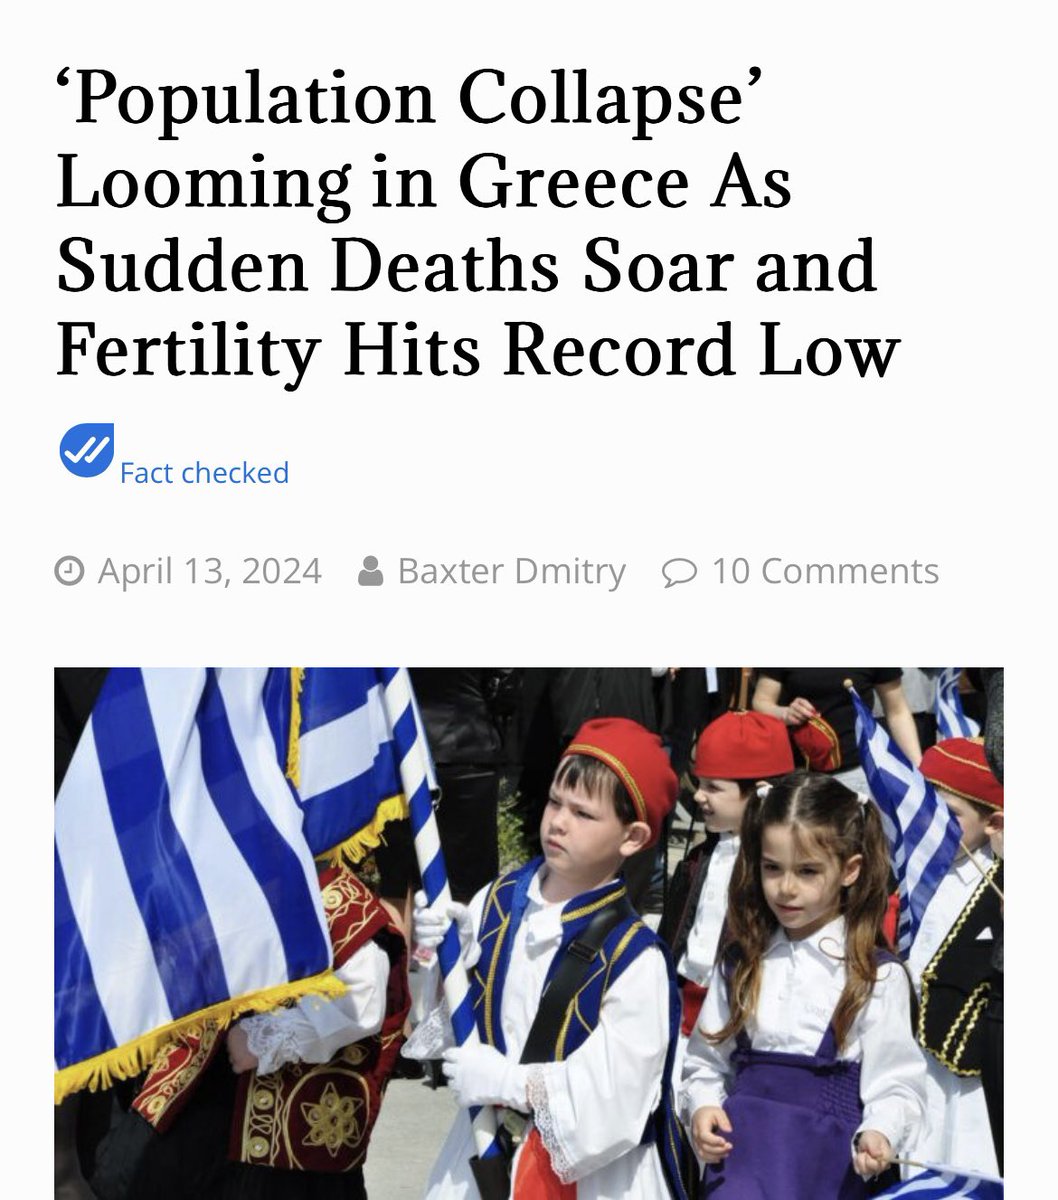 Greece is predicted to become the first nation to suffer “population collapse” as sudden and unexpected deaths continue soaring across the nation while fertility rates have plunged to levels lower than experts previously thought possible. Heart failure, strokes, blood clots, and…